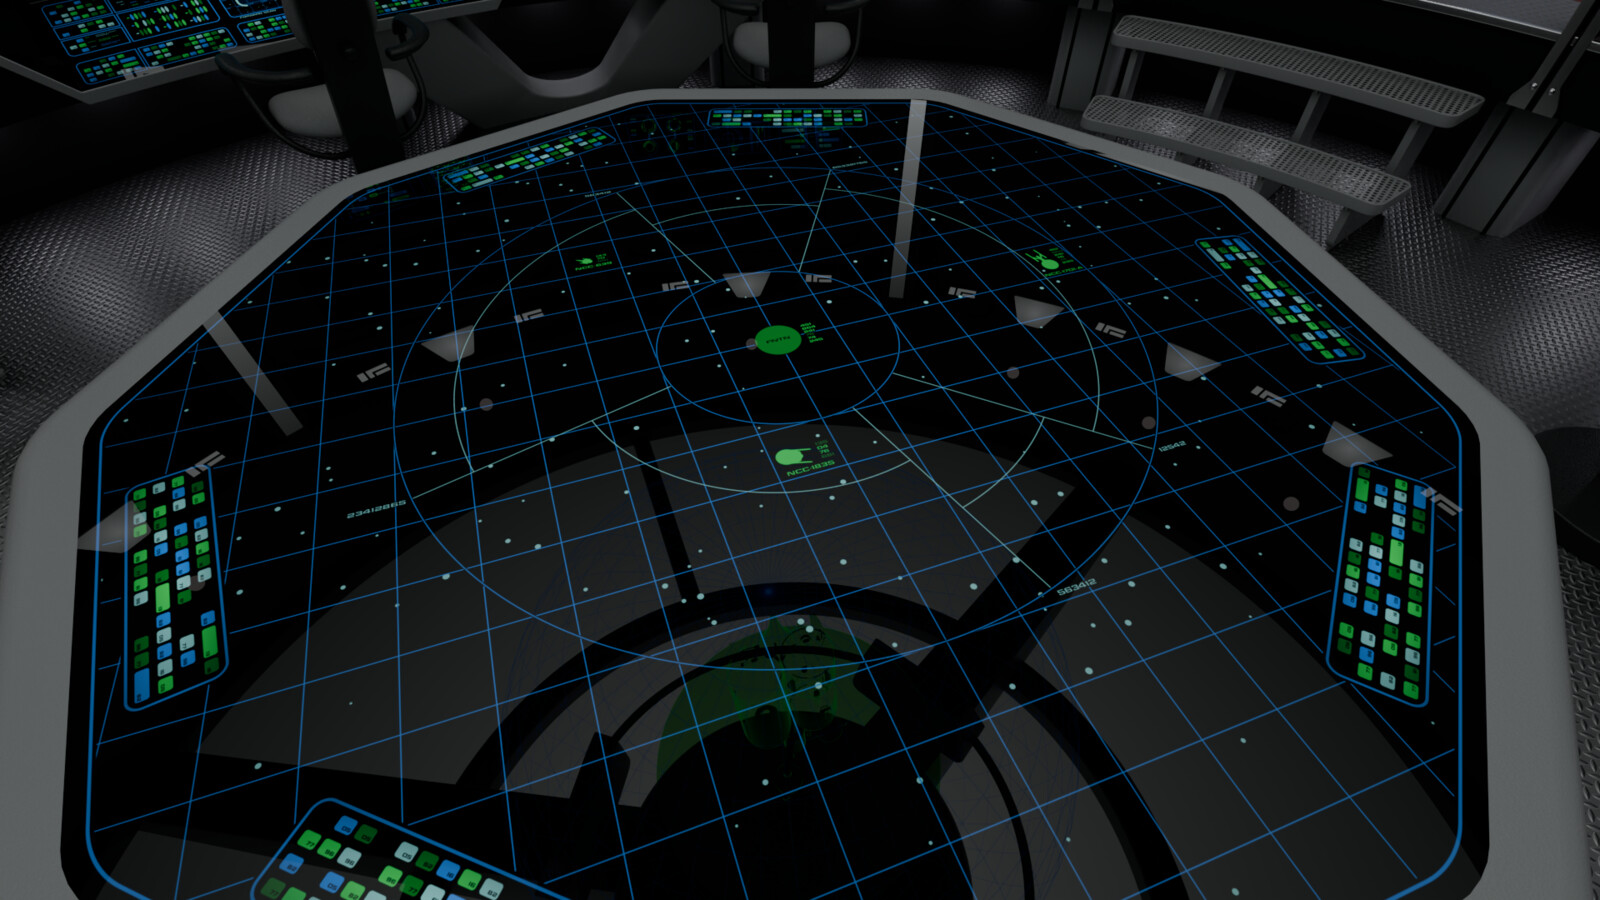 The situation table, showing starships Banting, Rutherford, and Enterprise around the station.